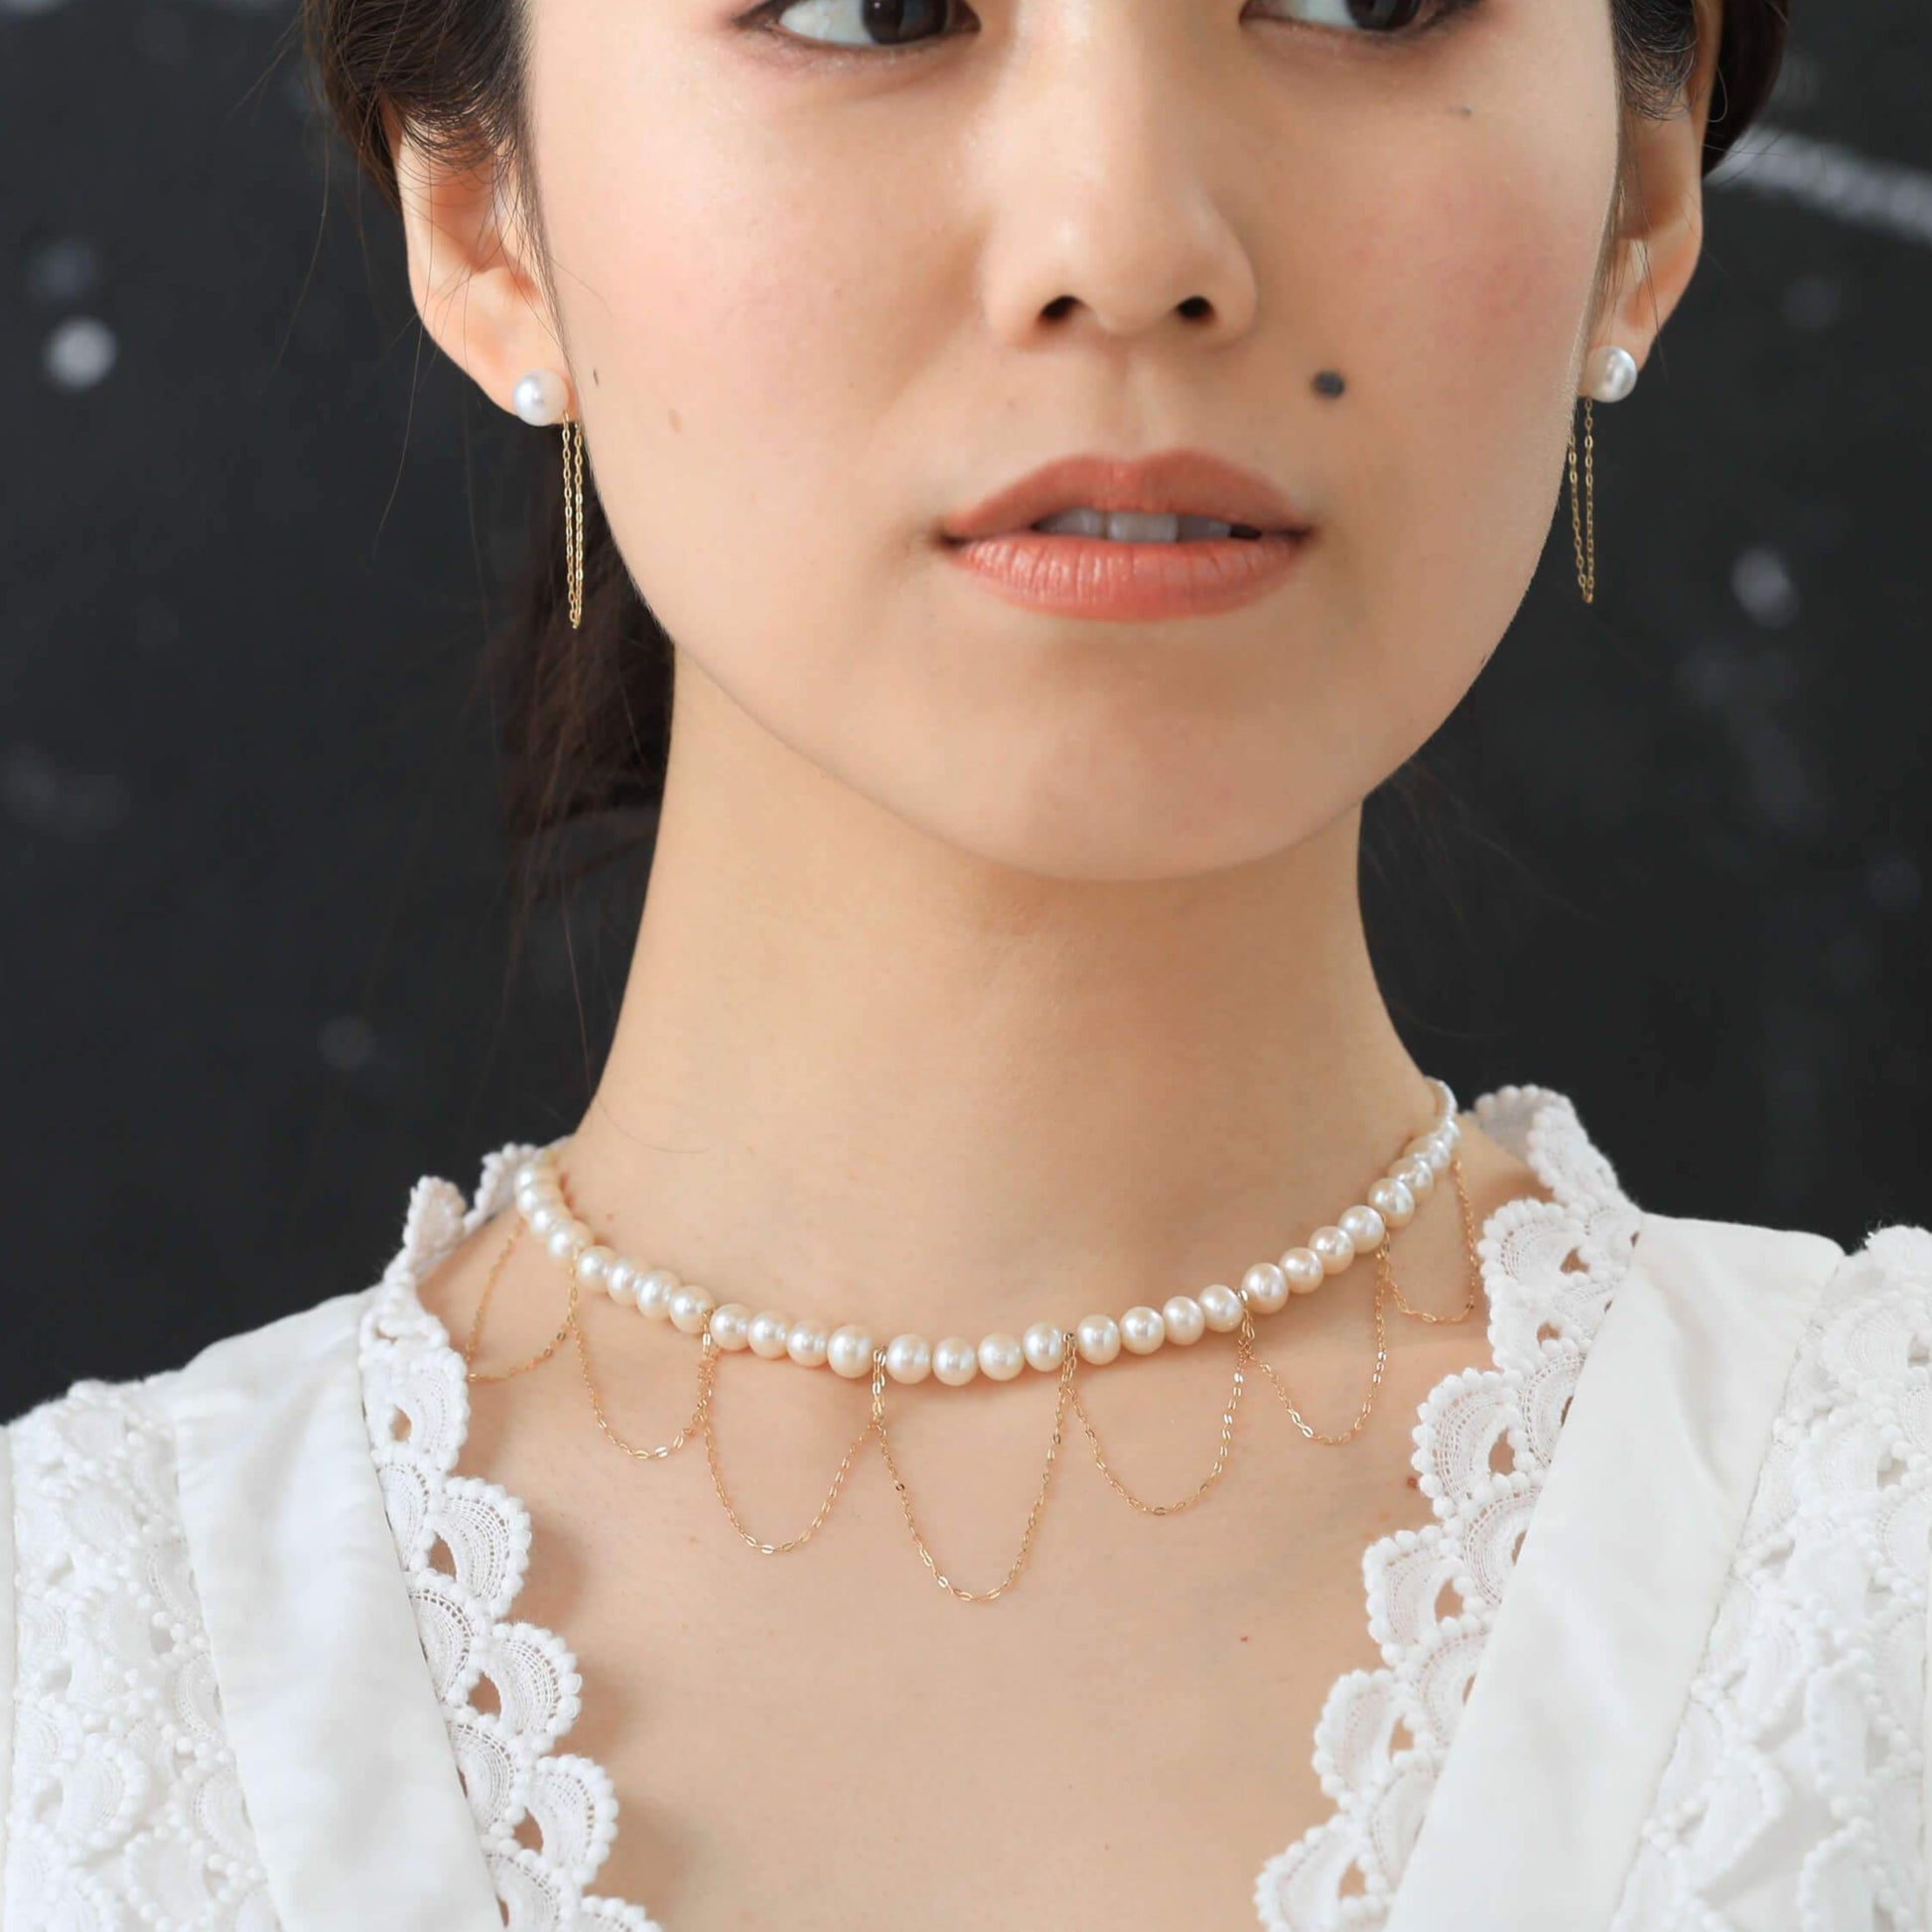 Stylish lady in white dress accessorized with gold and pearl necklace.